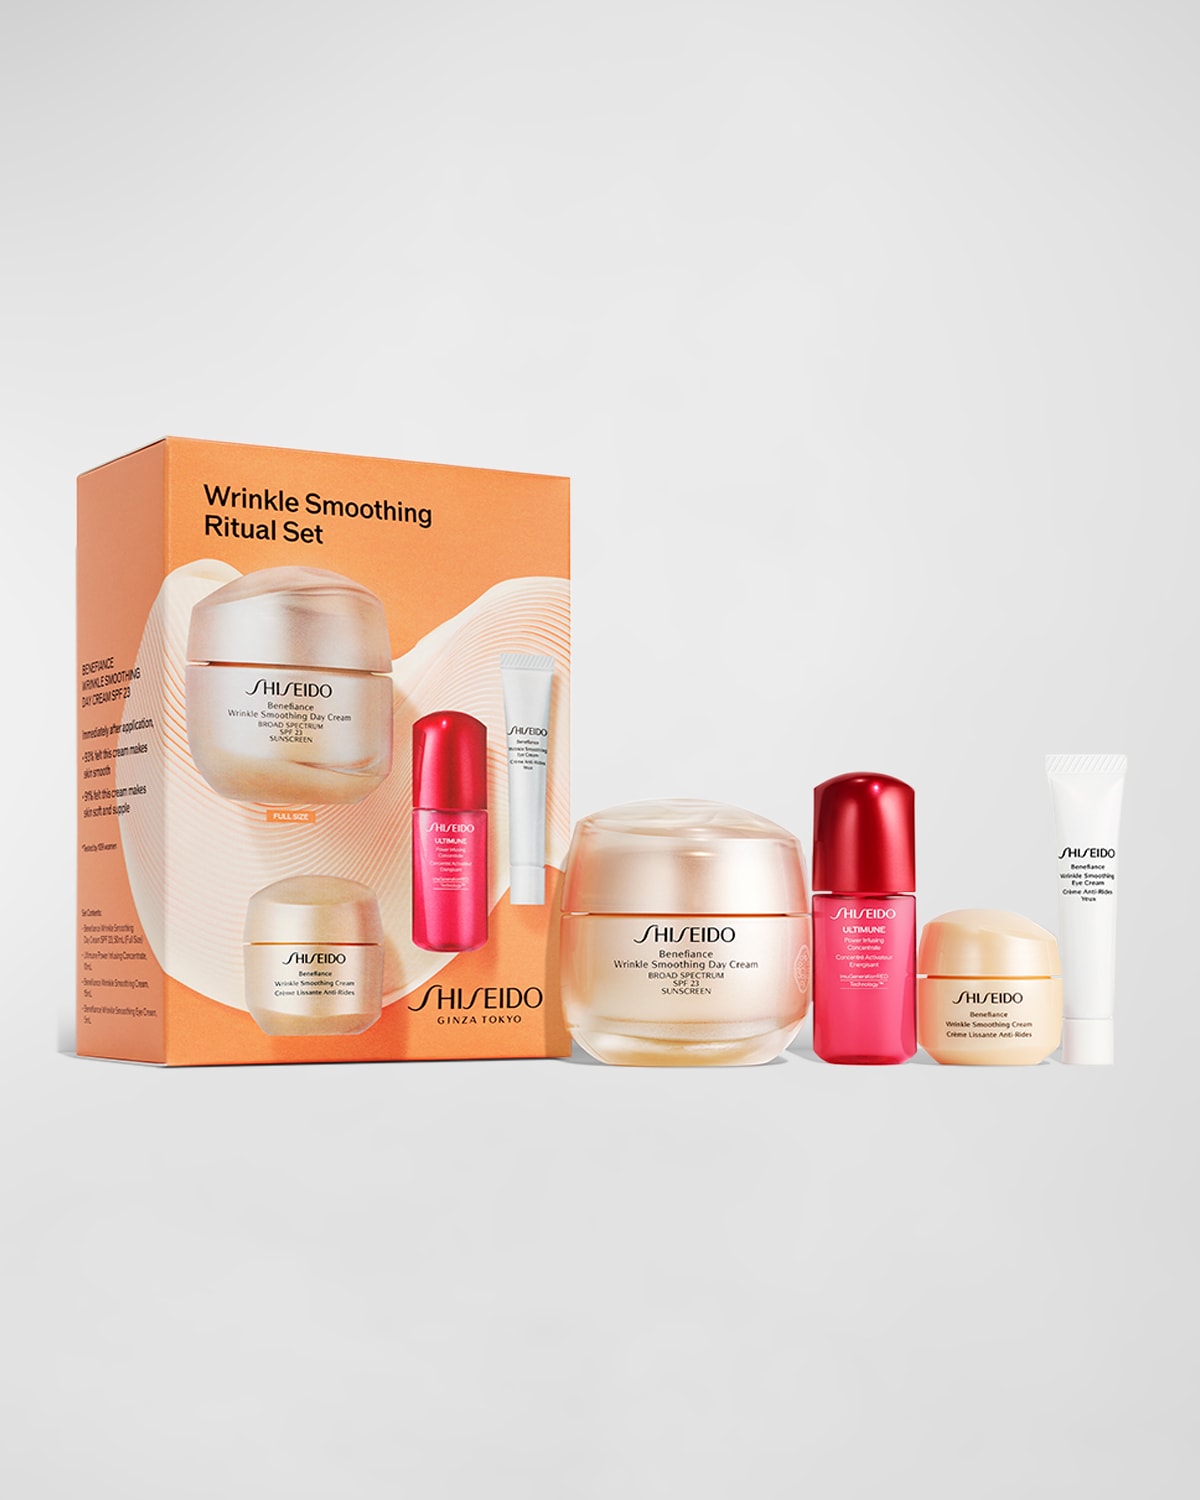 Limited Edition Wrinkle Smoothing Ritual Set ($144 Value)